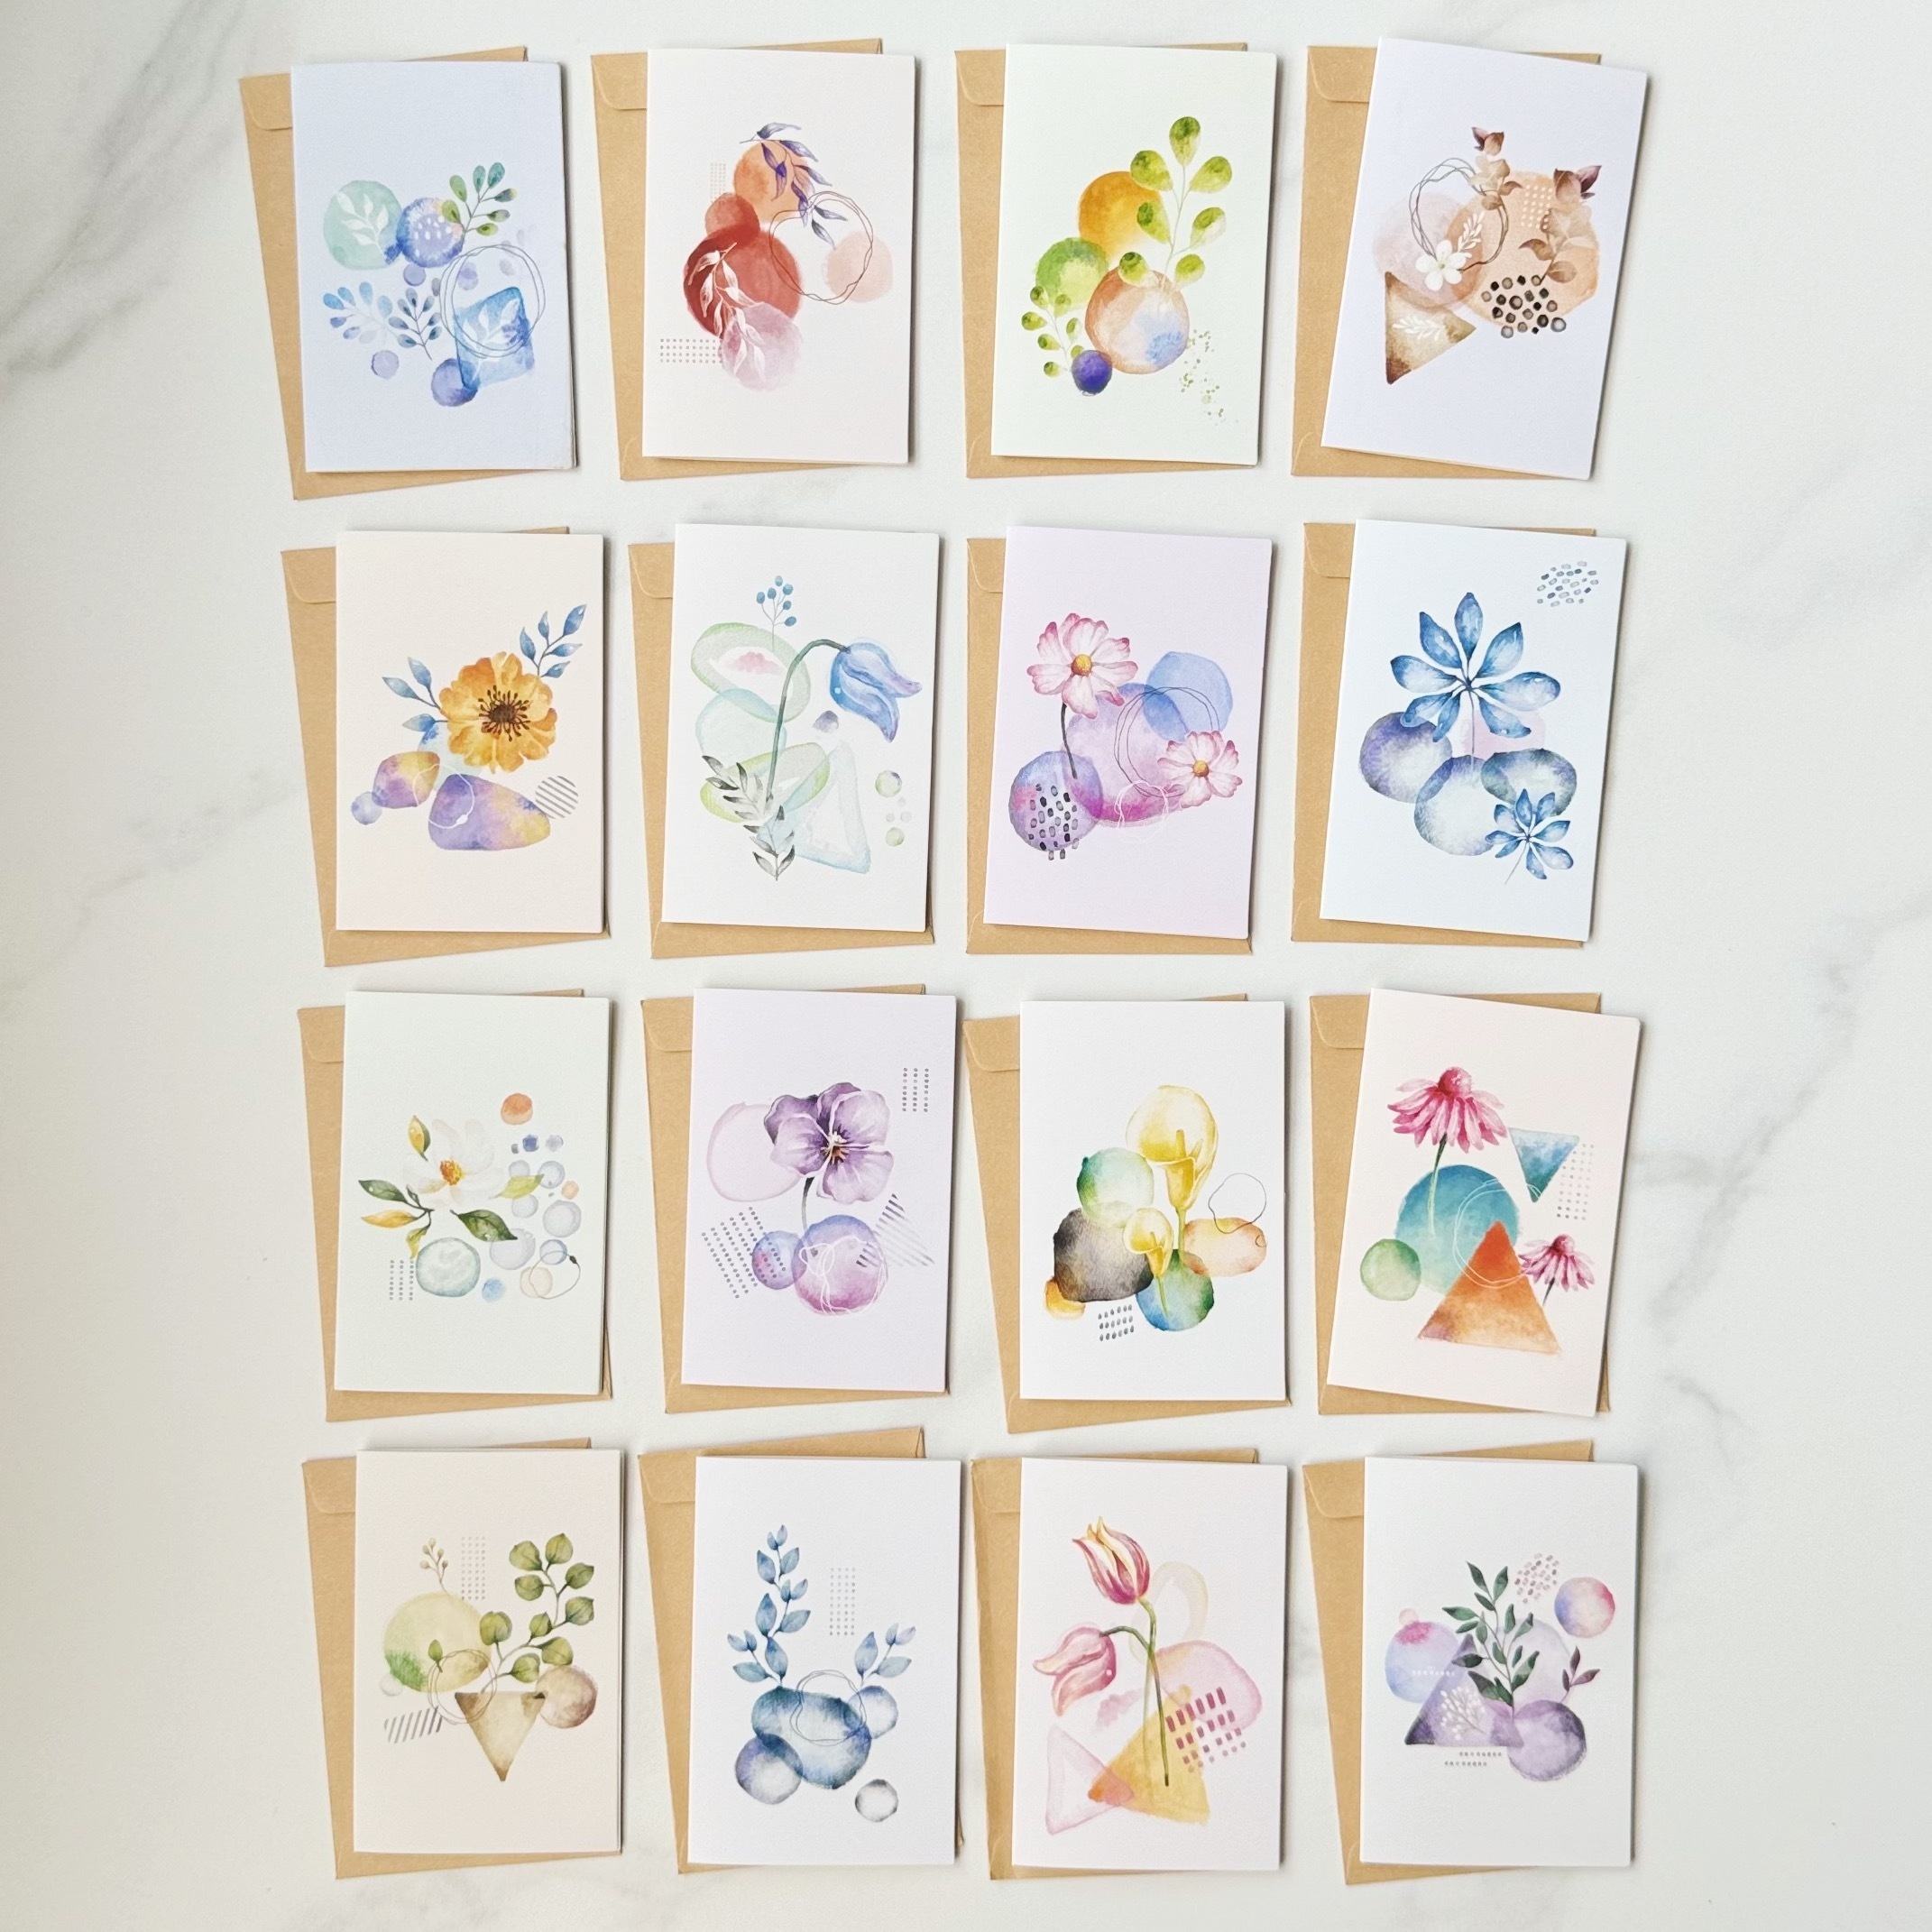 

16-piece Floral Ink Design Greeting Cards With Envelopes - Perfect For Birthdays, Mother's Day, Valentine's, Anniversaries & More - Versatile Thank You, Appreciation & Office Supplies